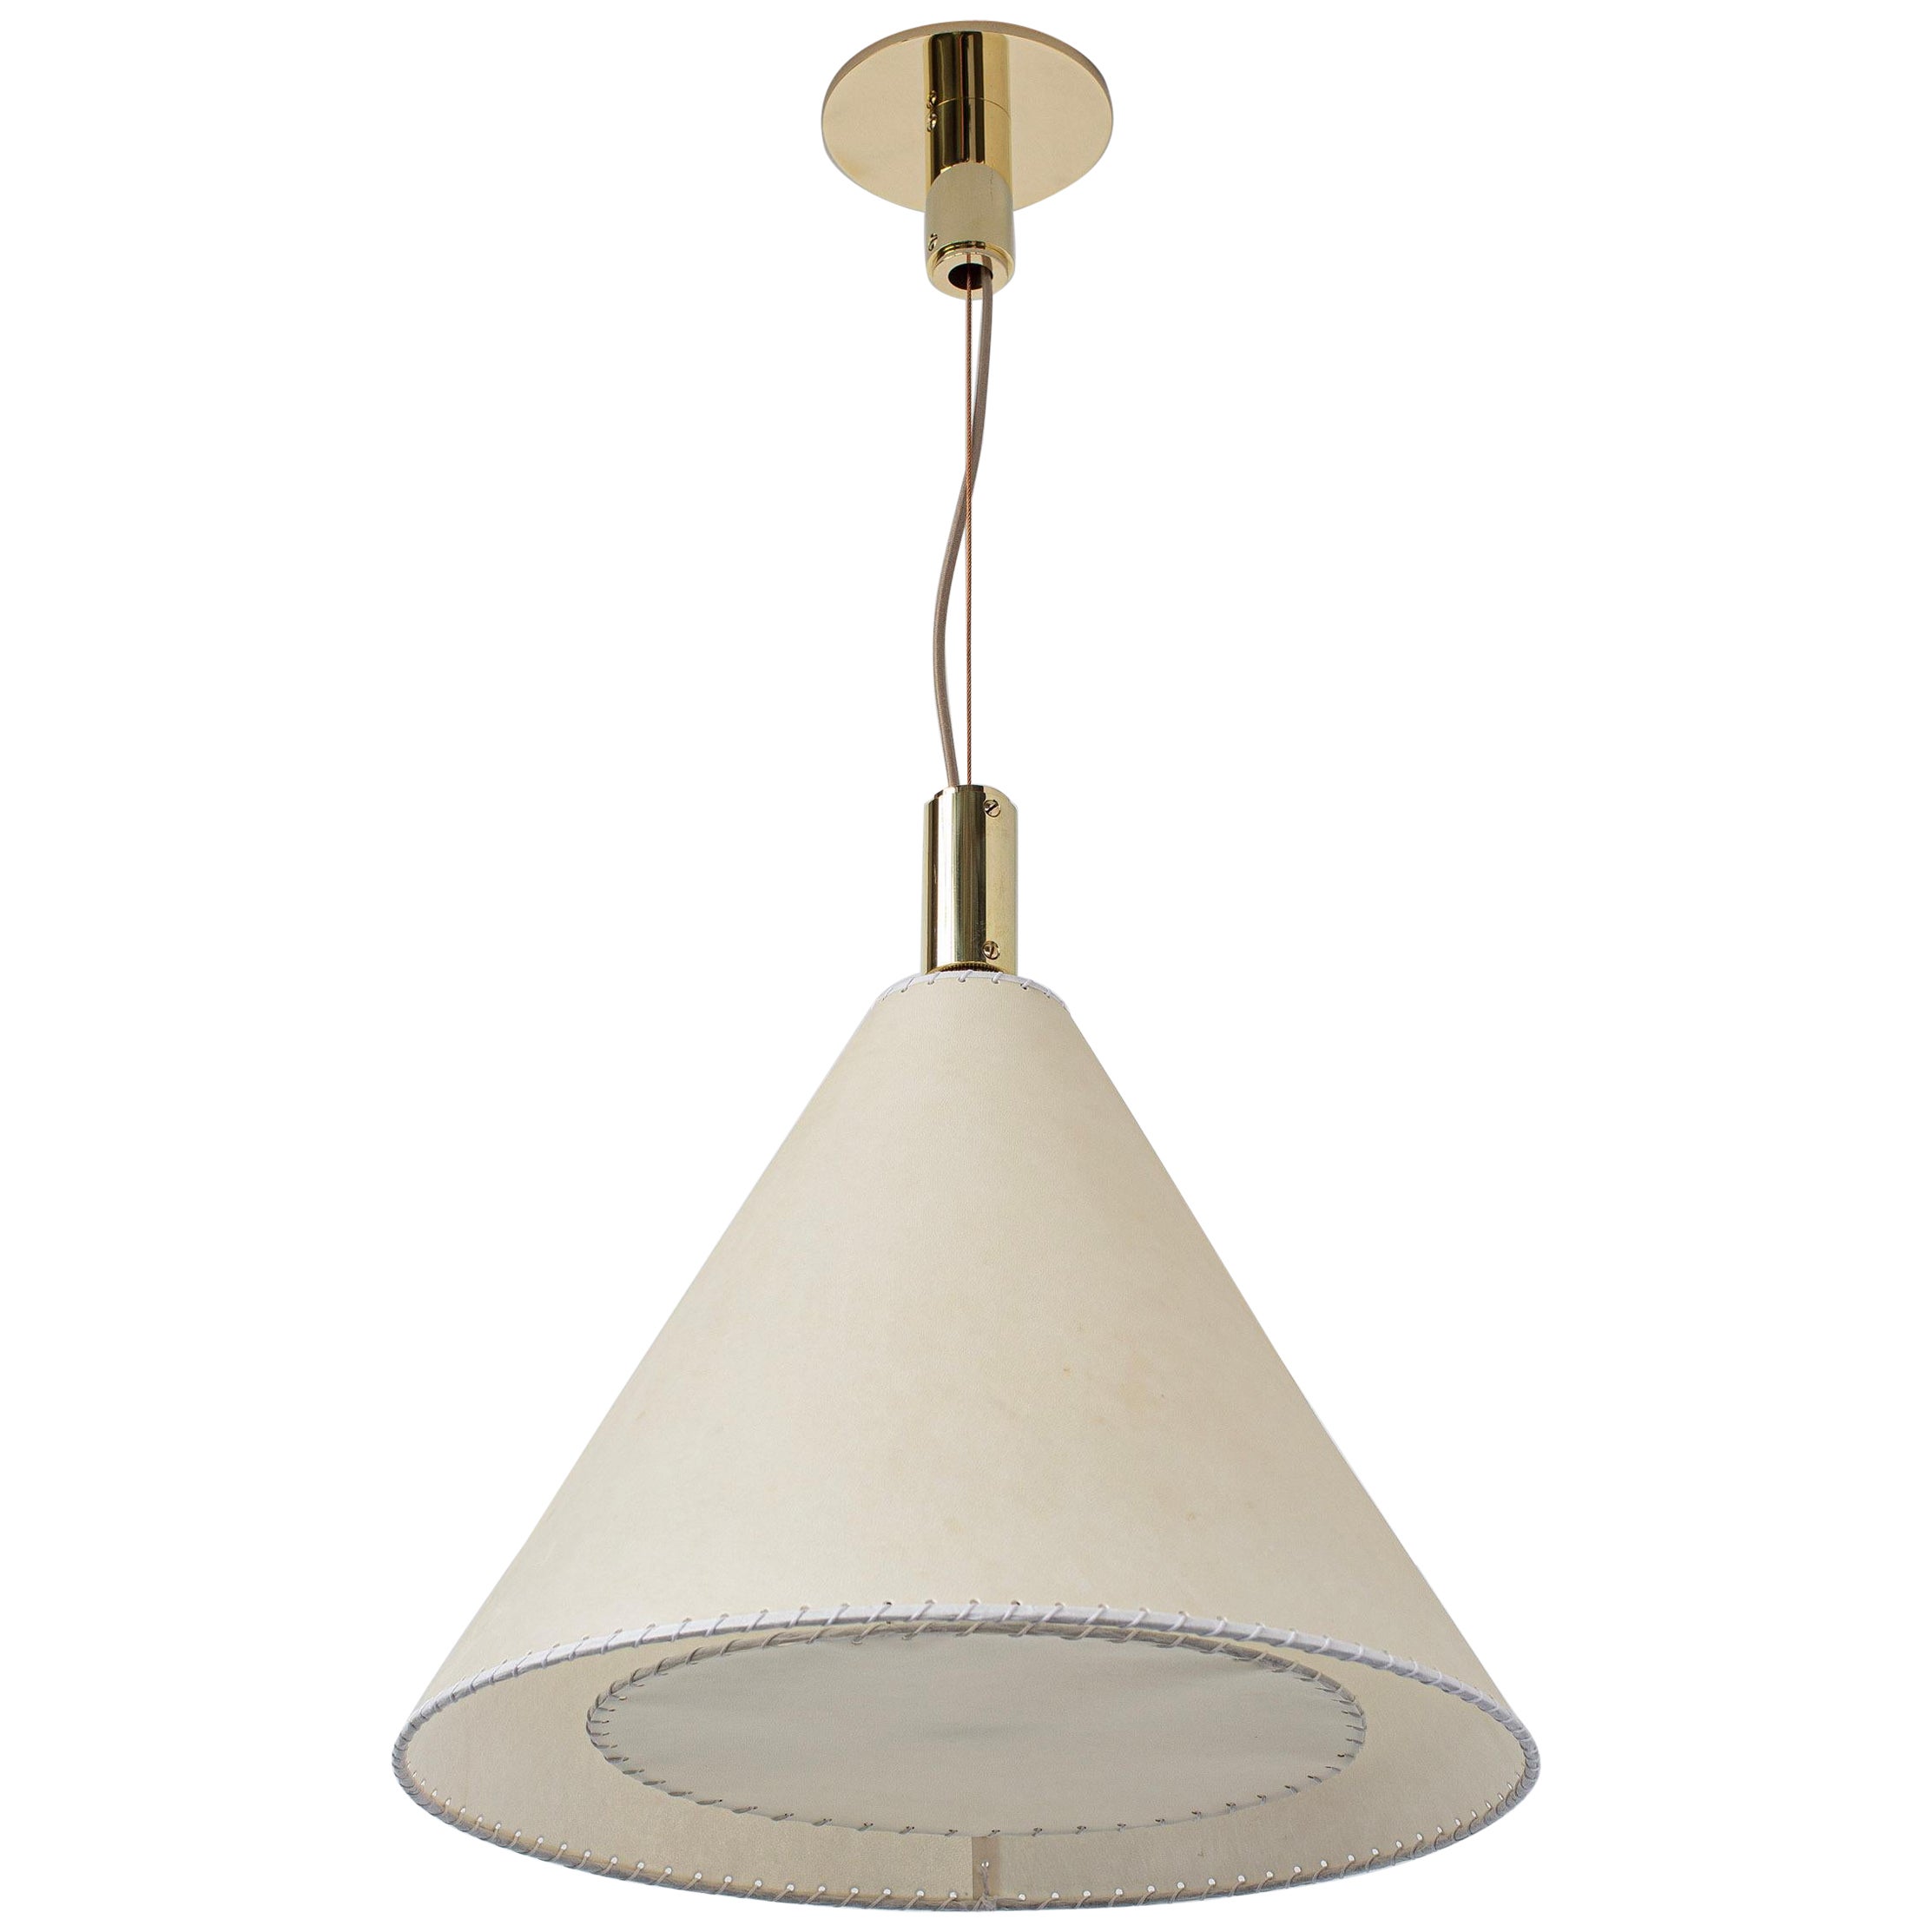 Series 02 Pendant, Polished Unlacquered Brass, Large Goatskin Parchment Shade